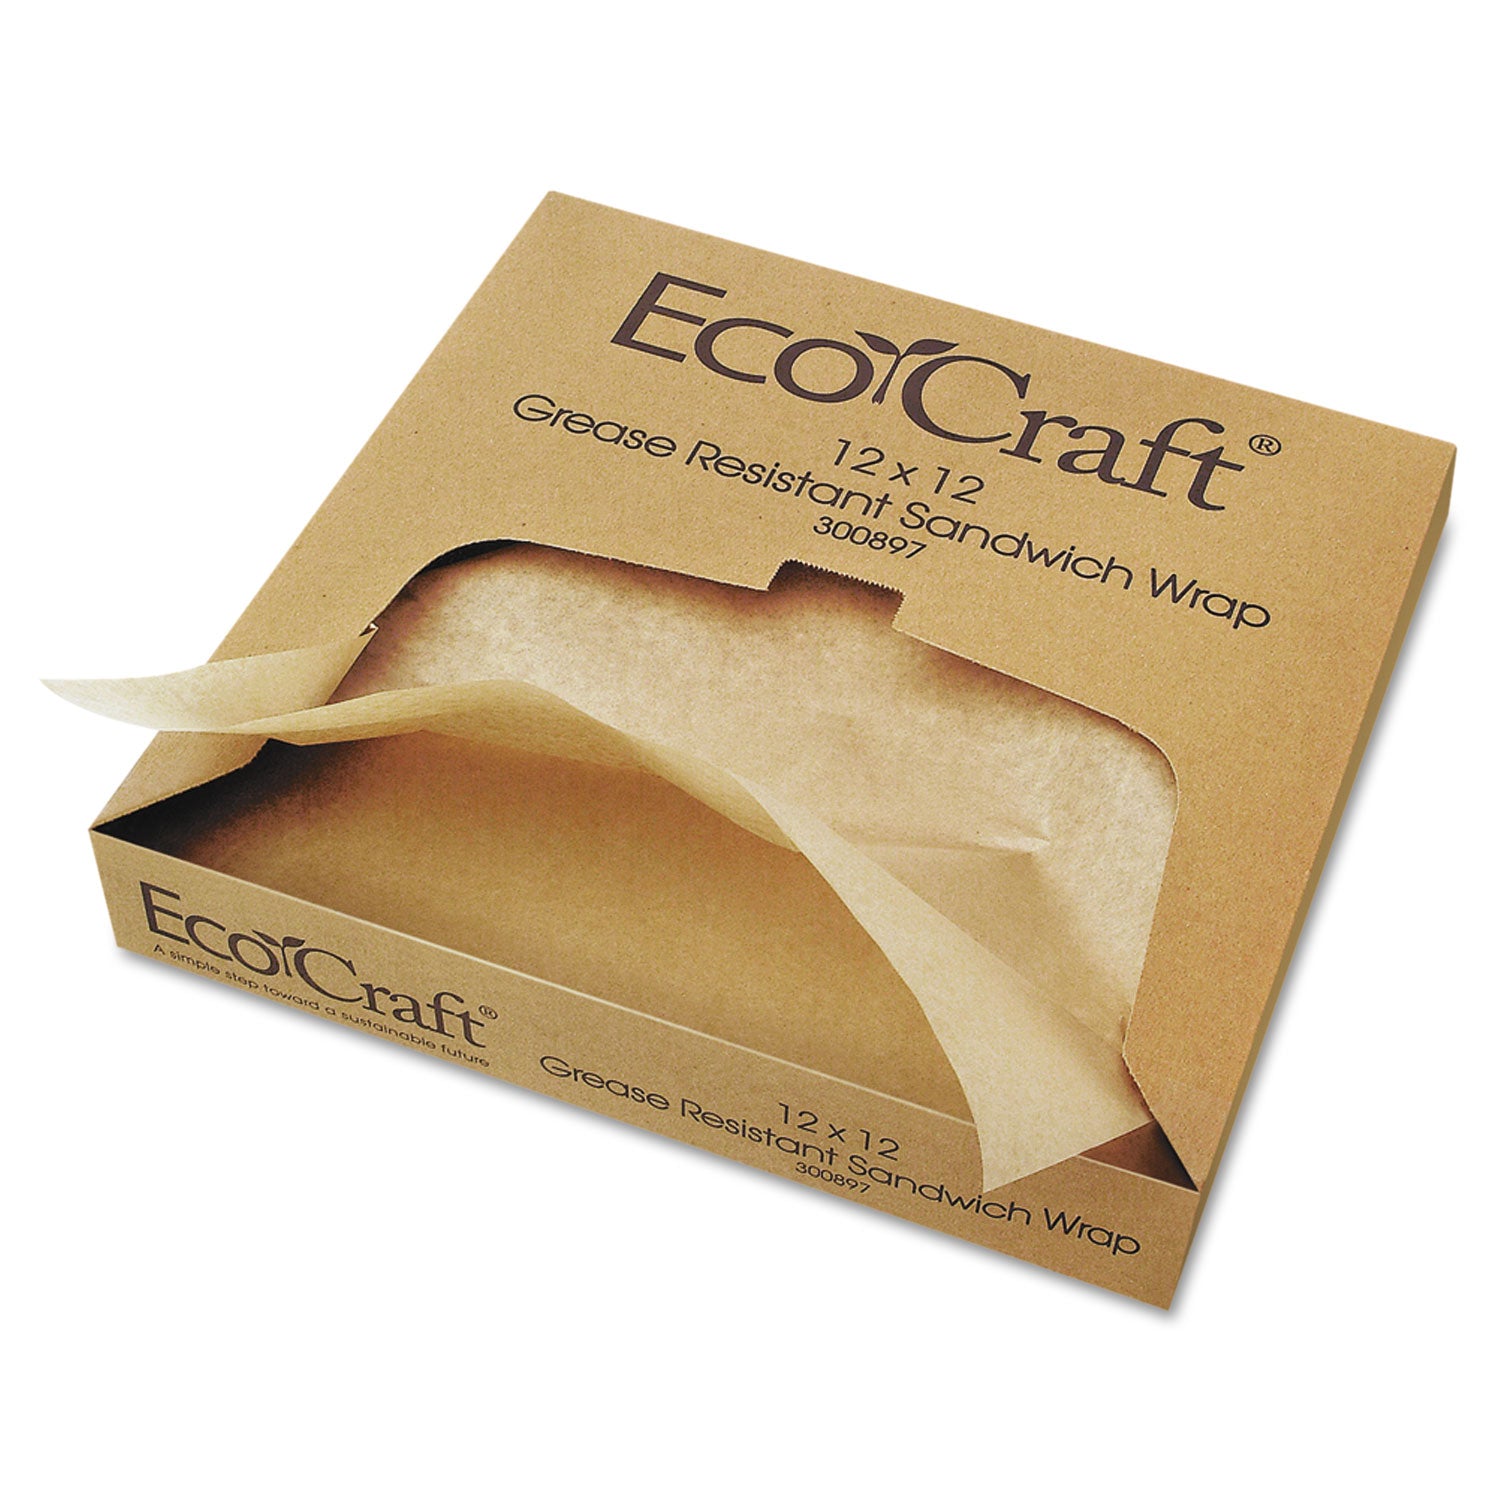 ecocraft-grease-resistant-paper-wraps-and-liners-natural-12-x-12-1000-box-5-boxes-carton_bgc300897 - 1